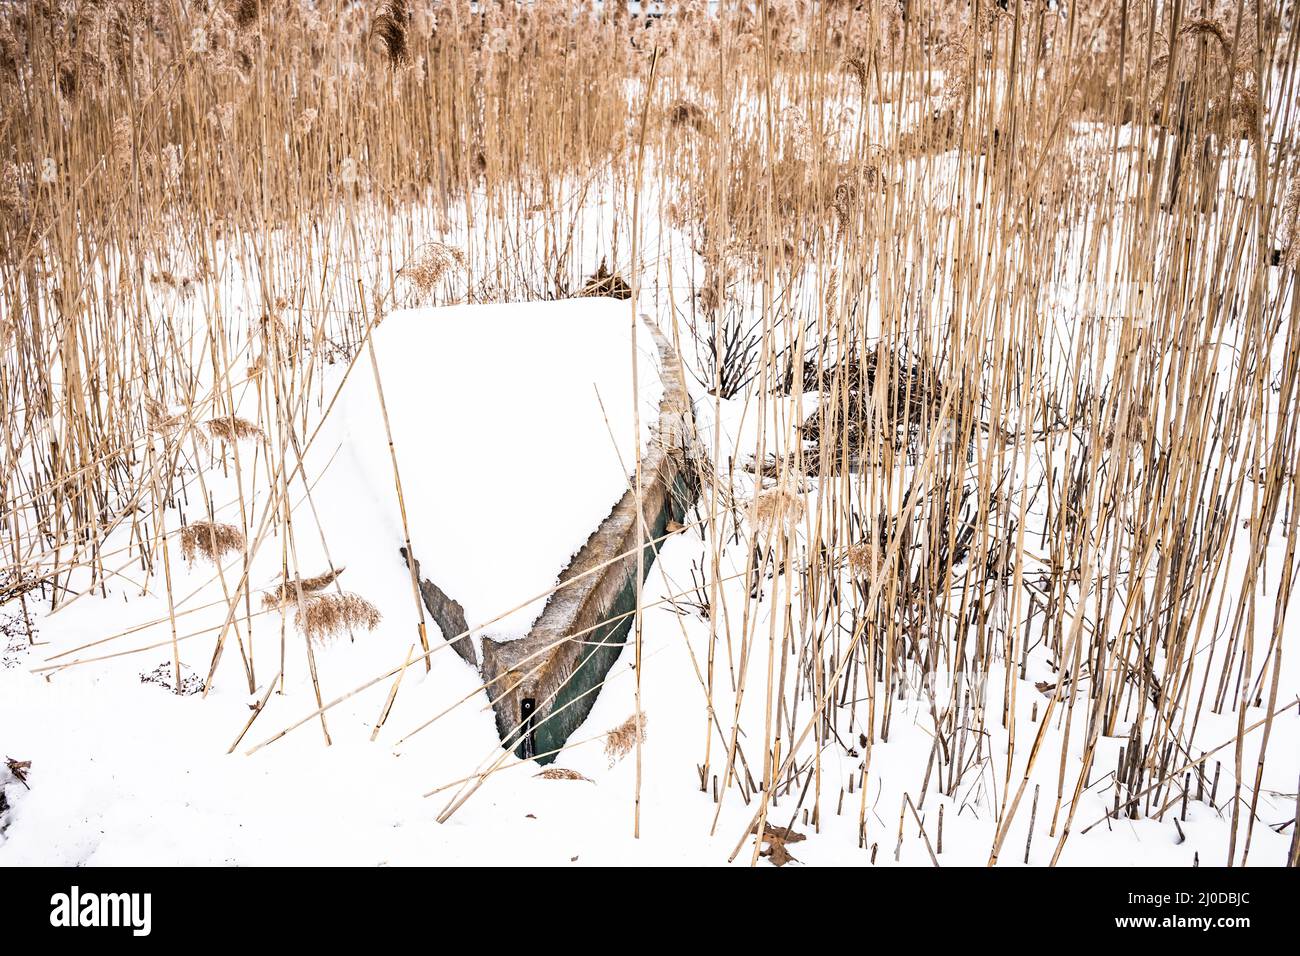 This Dingy was just left in a field on sea grass, and is now covered with snow until Spring when its owner will come looking for it once more. Stock Photo